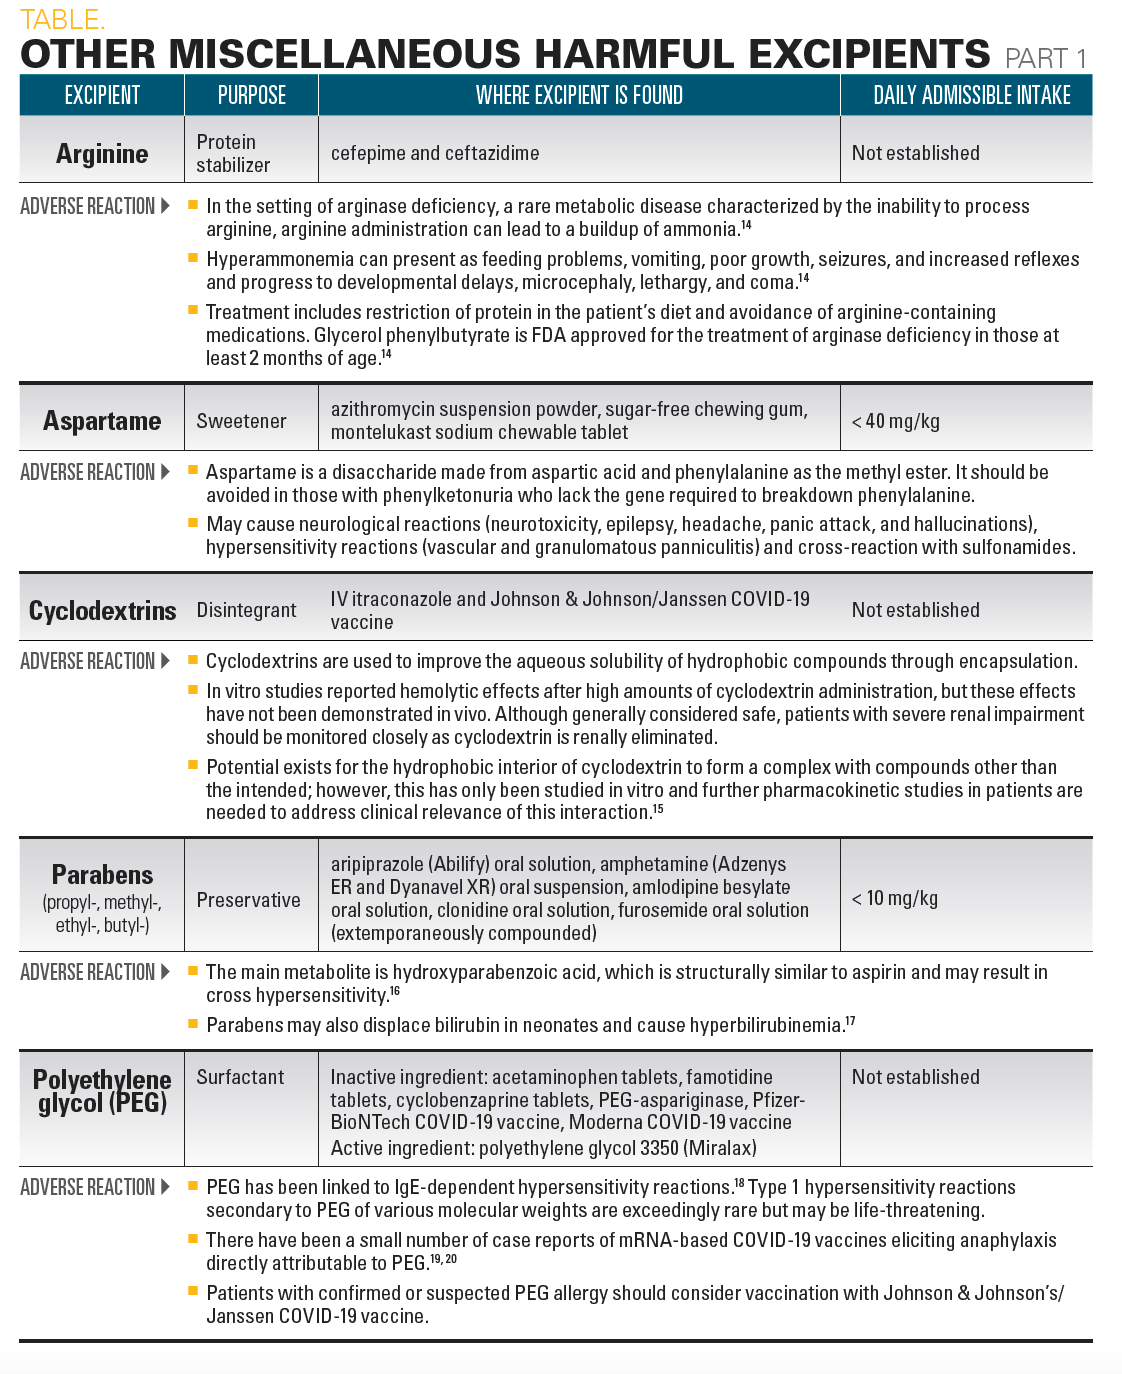 A table of harmful excipients in pharmaceuticals